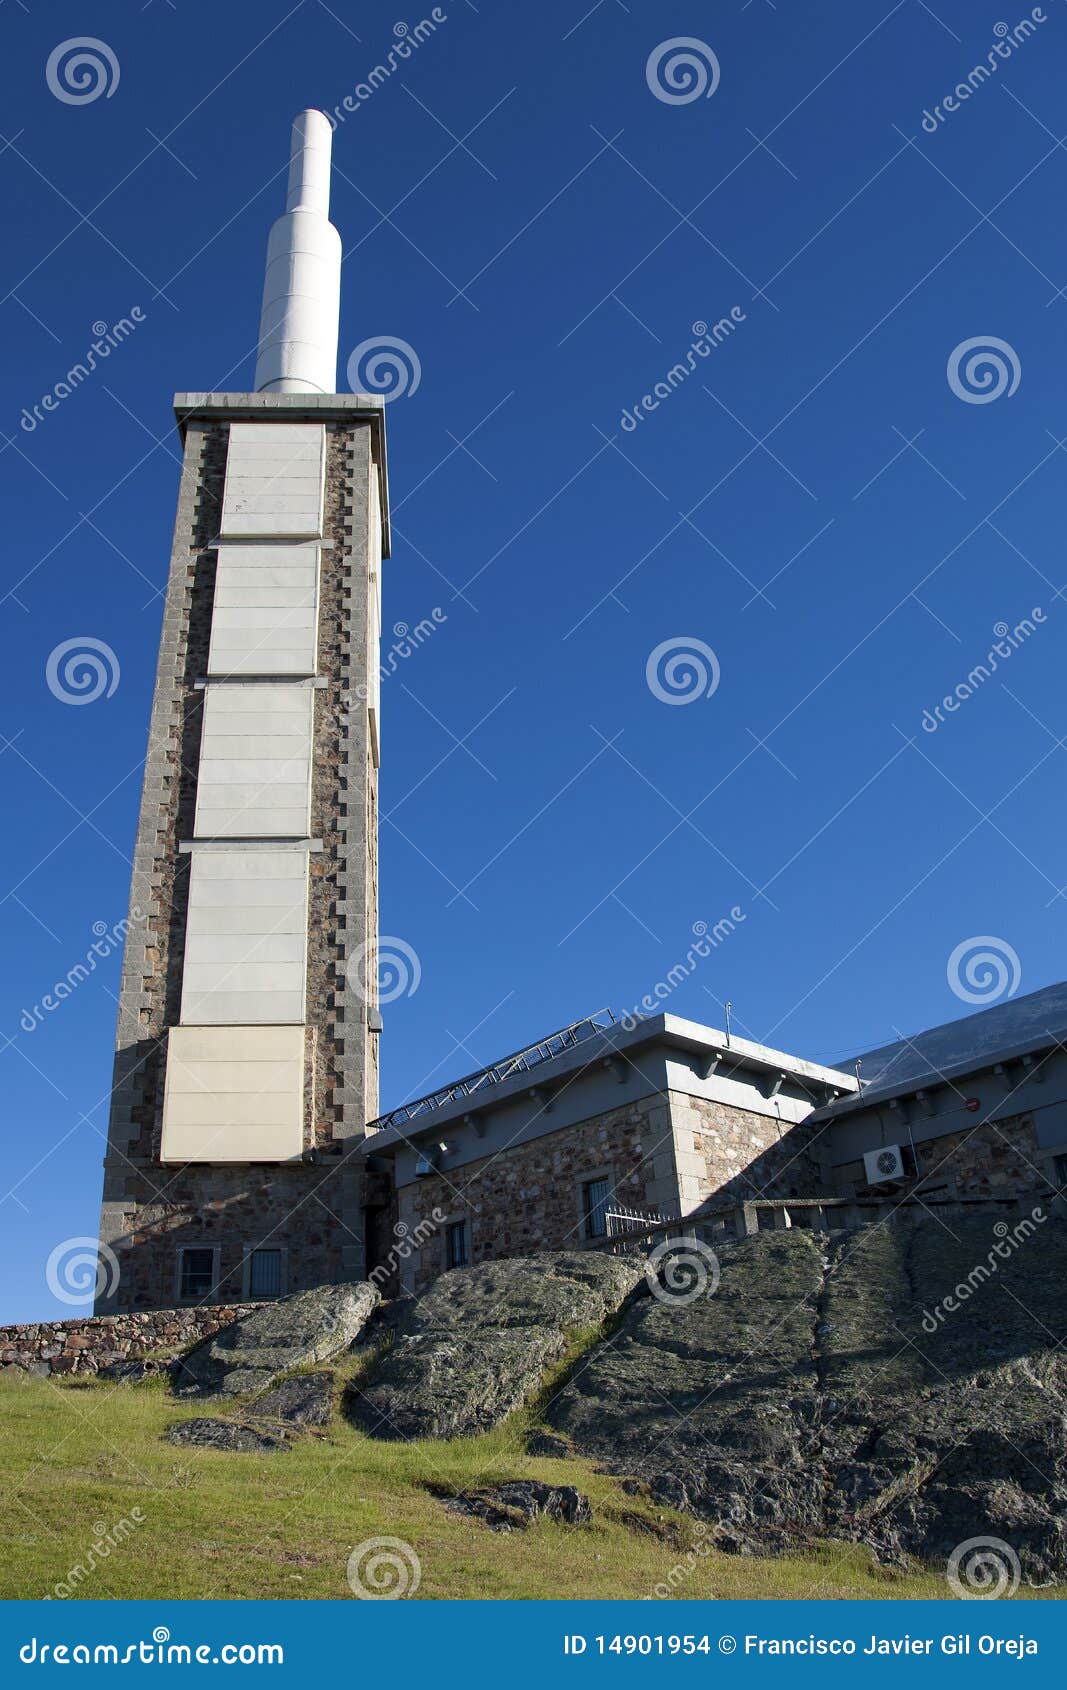 communications tower in the peÃÂ±a de francia